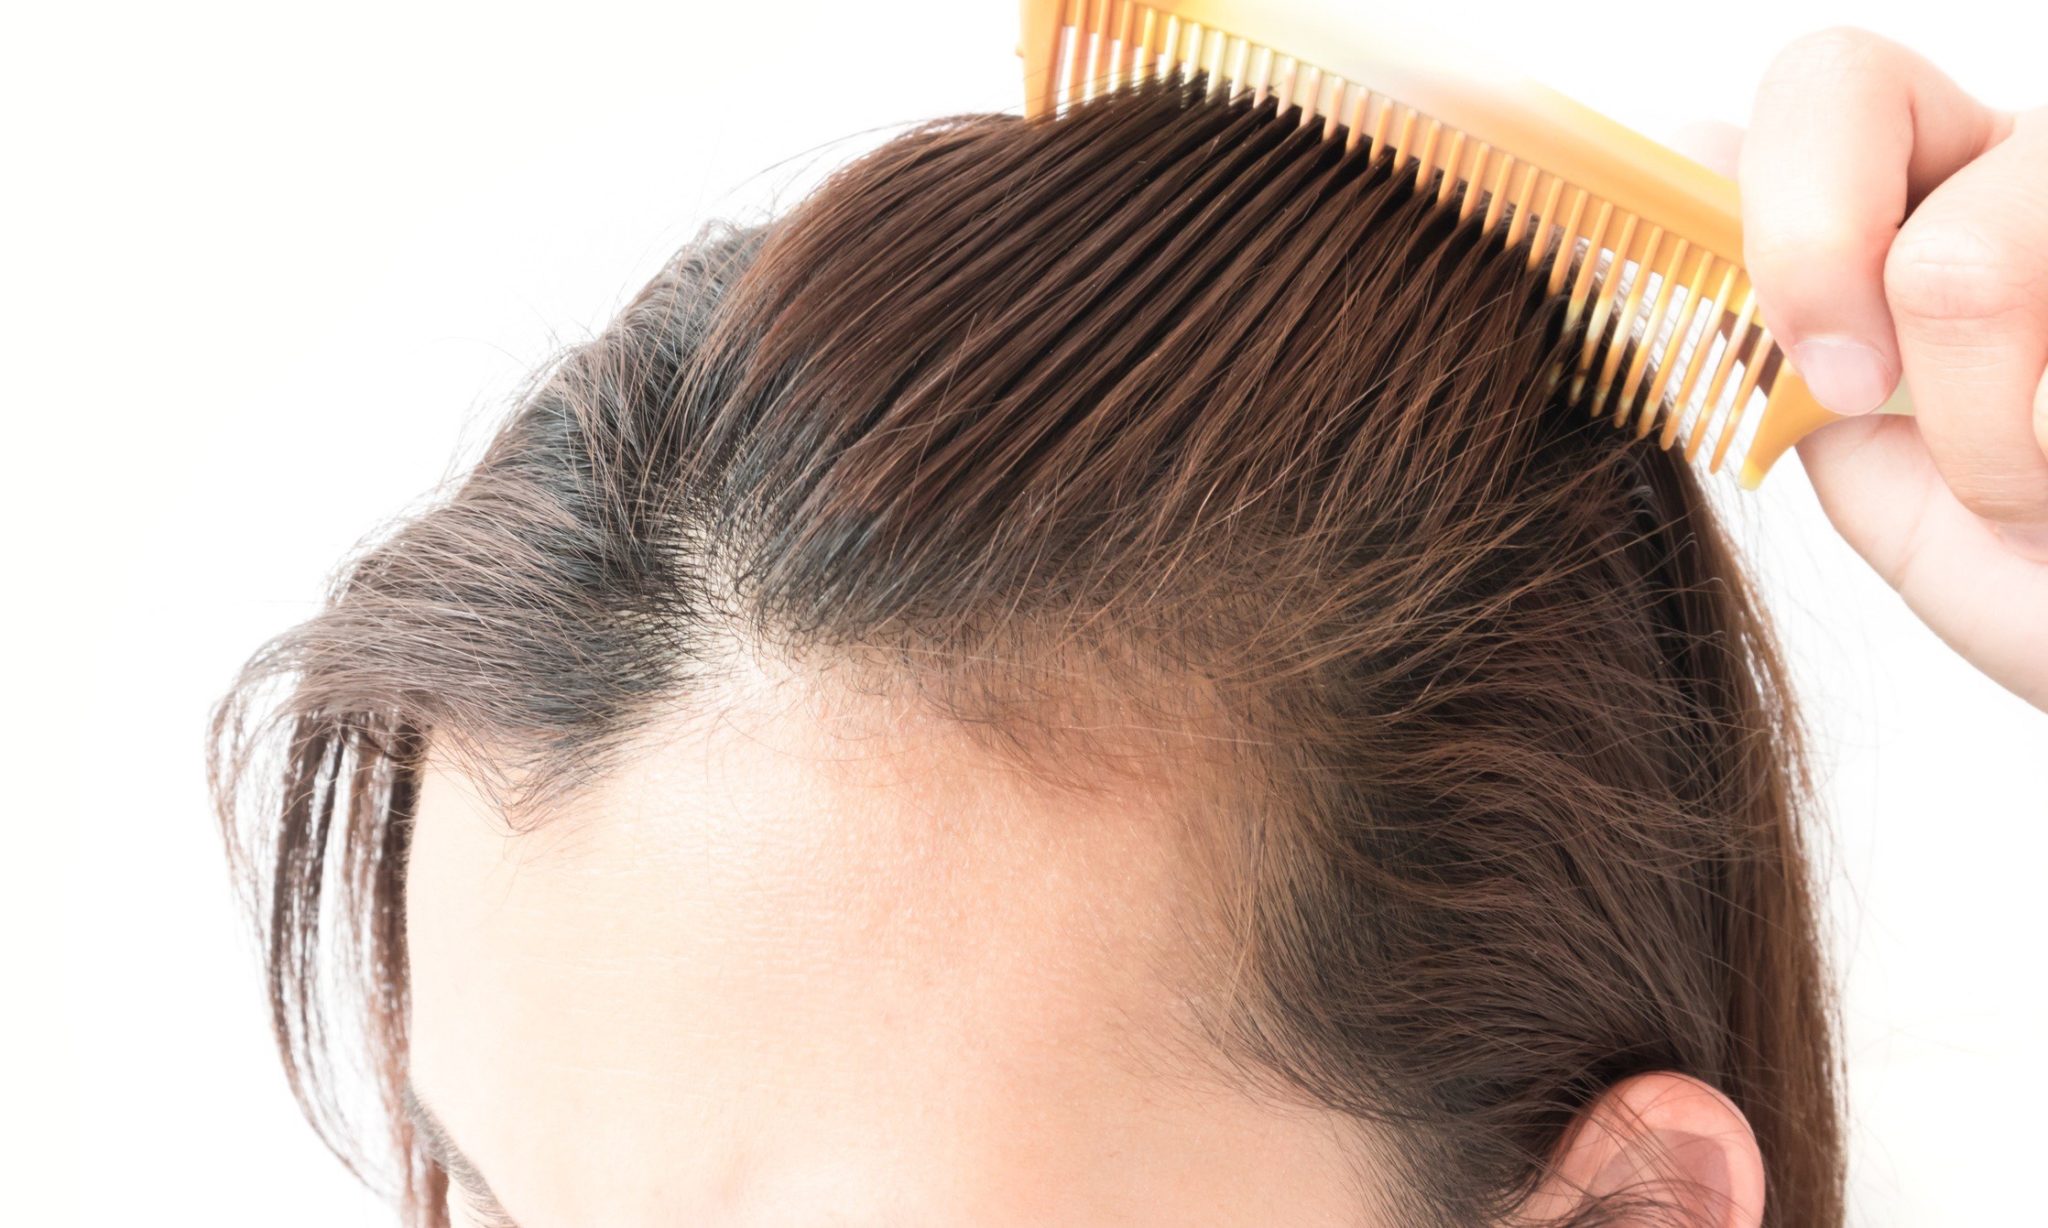 How to Determine Effectiveness of Shampoo Brands for Hair Loss ...